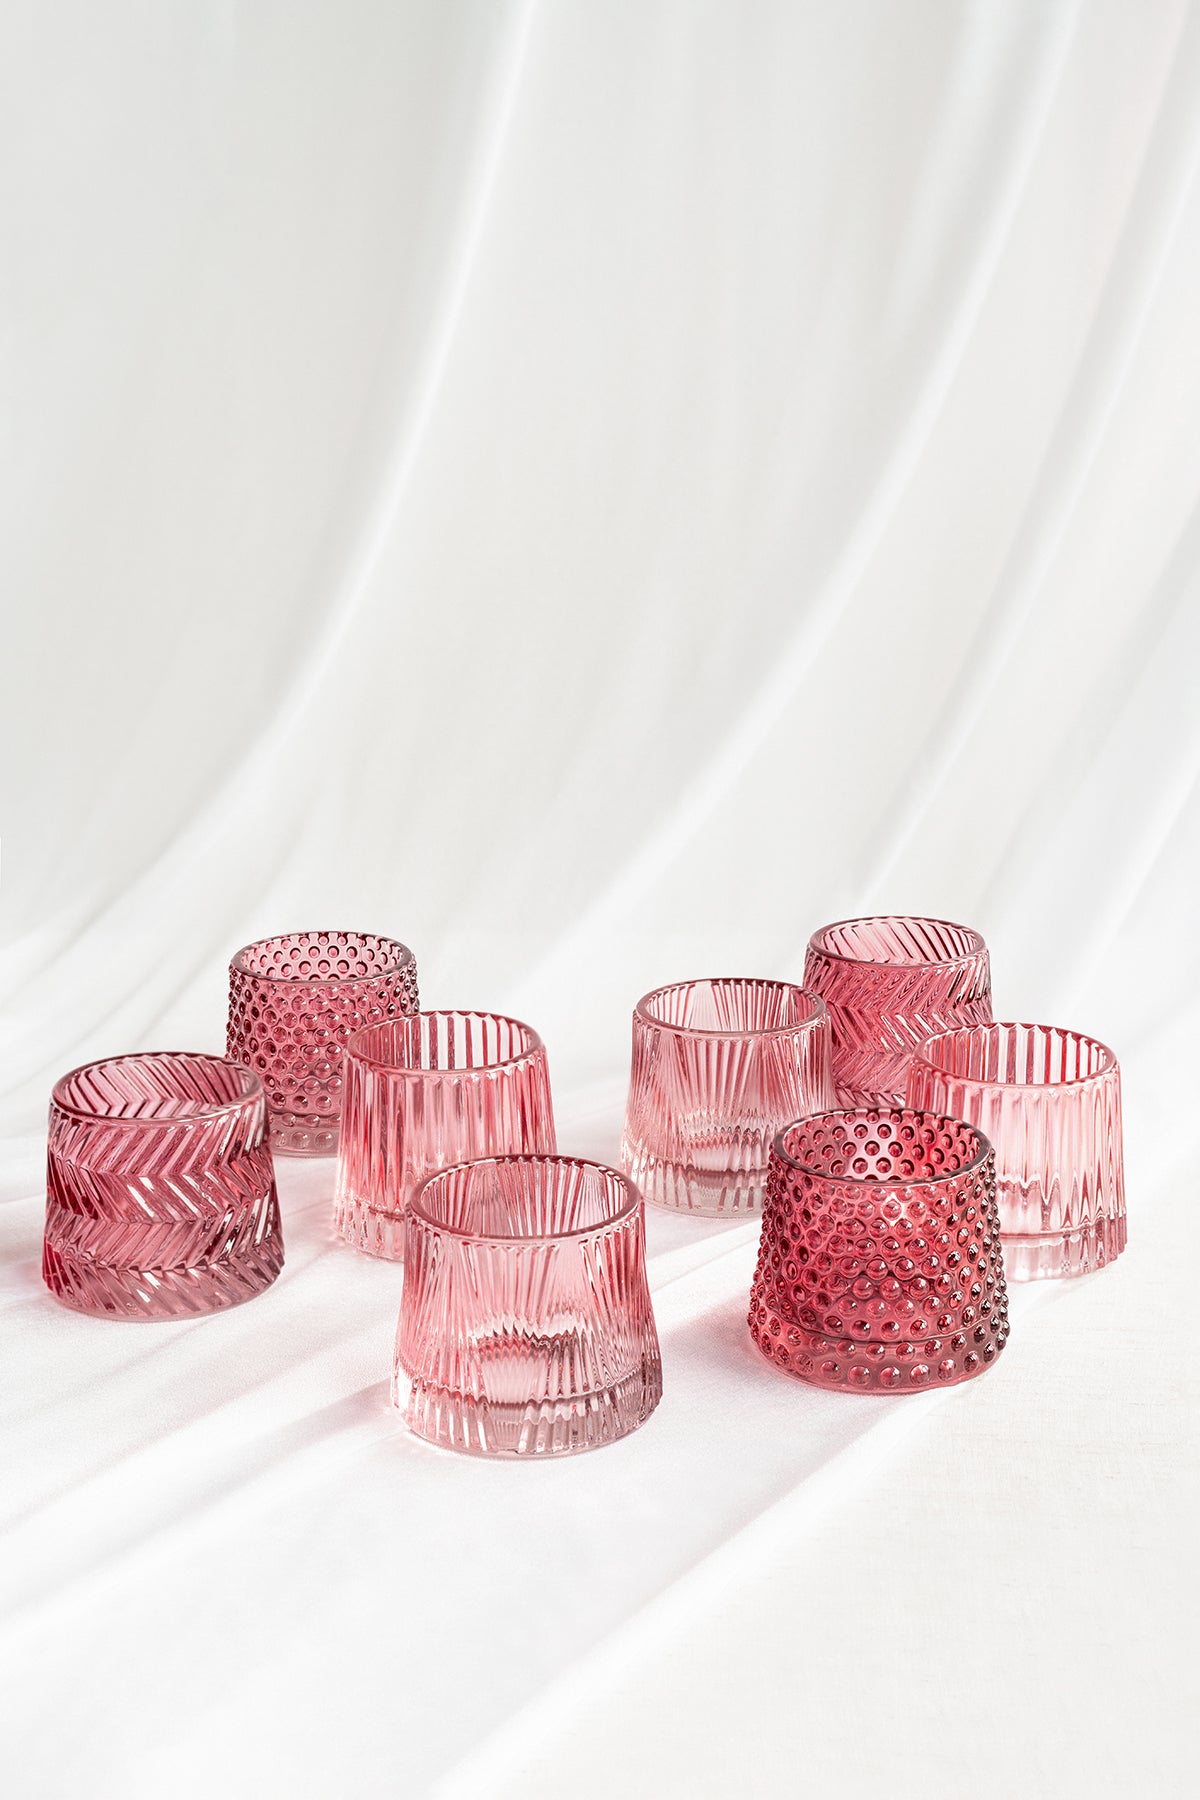 Glass Candle Holder in Passionate Pink & Blush